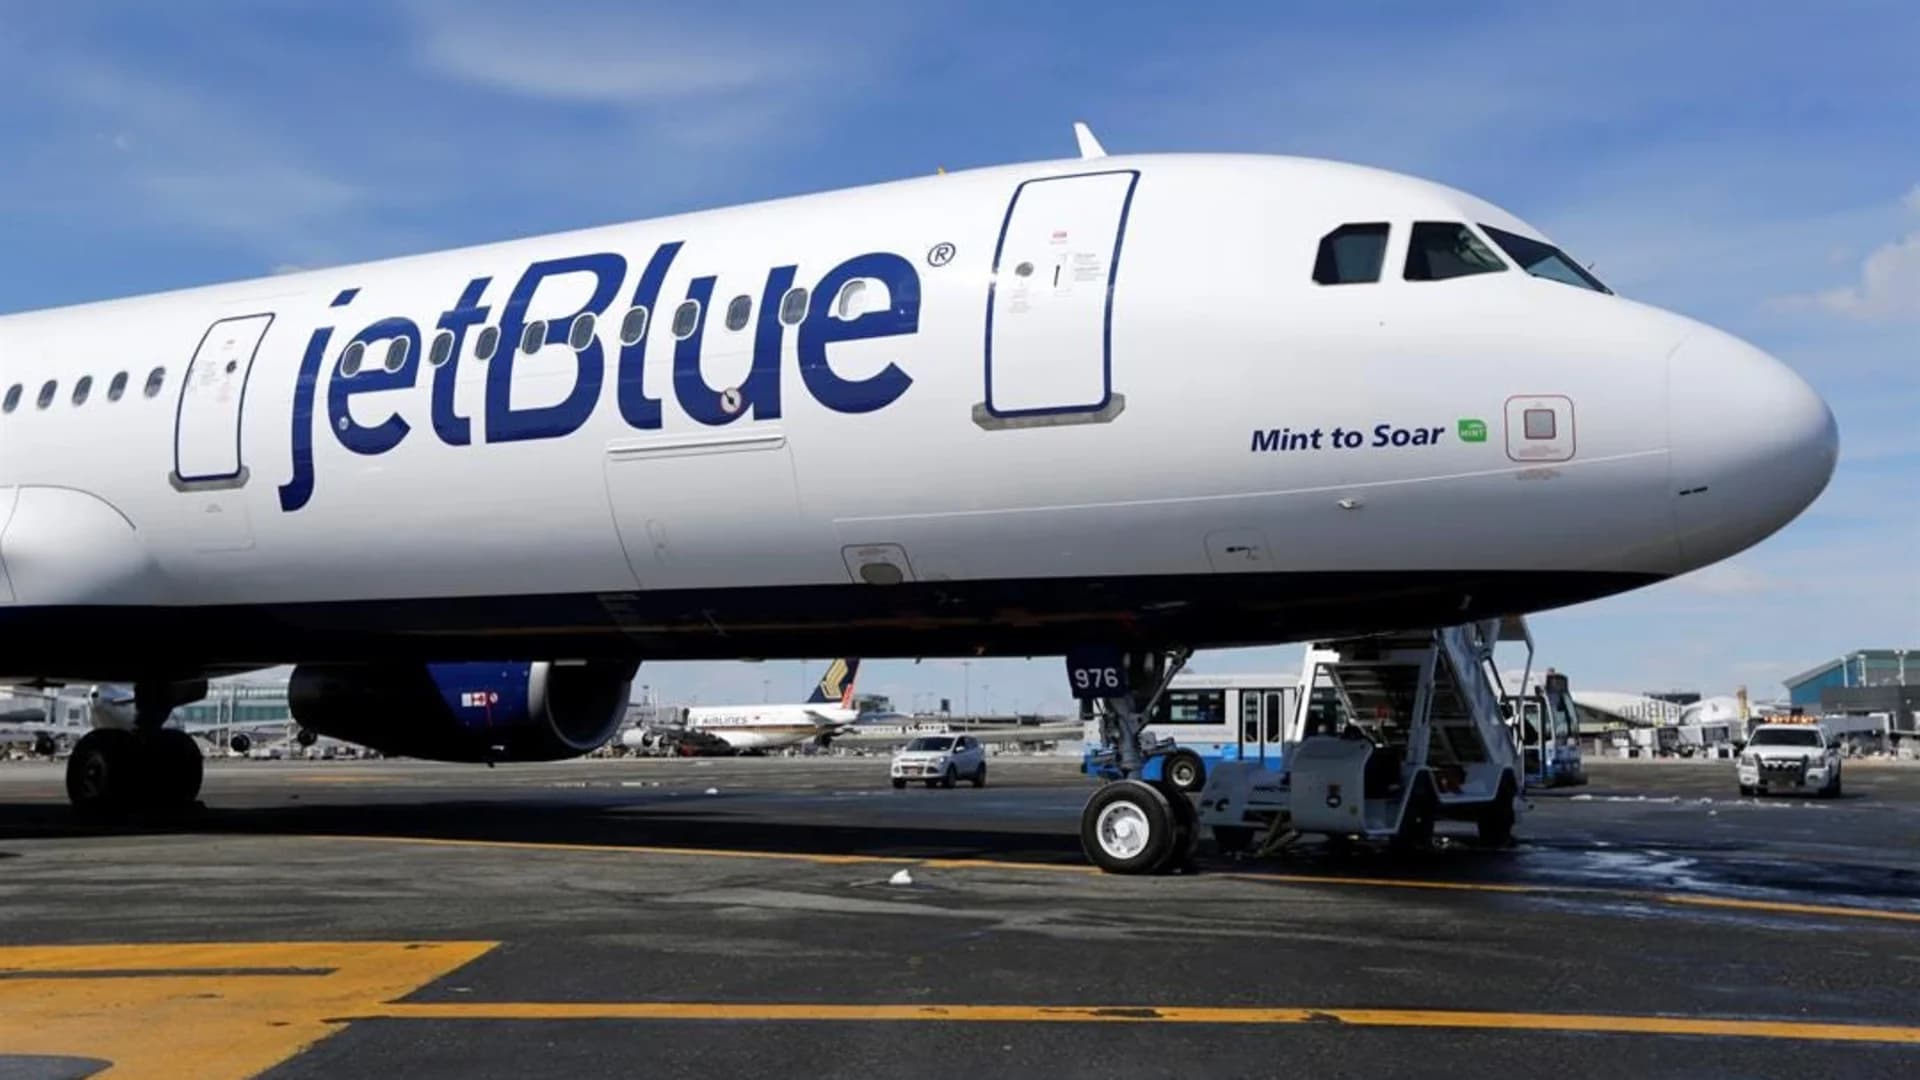 JetBlue experiences outages with reservation system worldwide